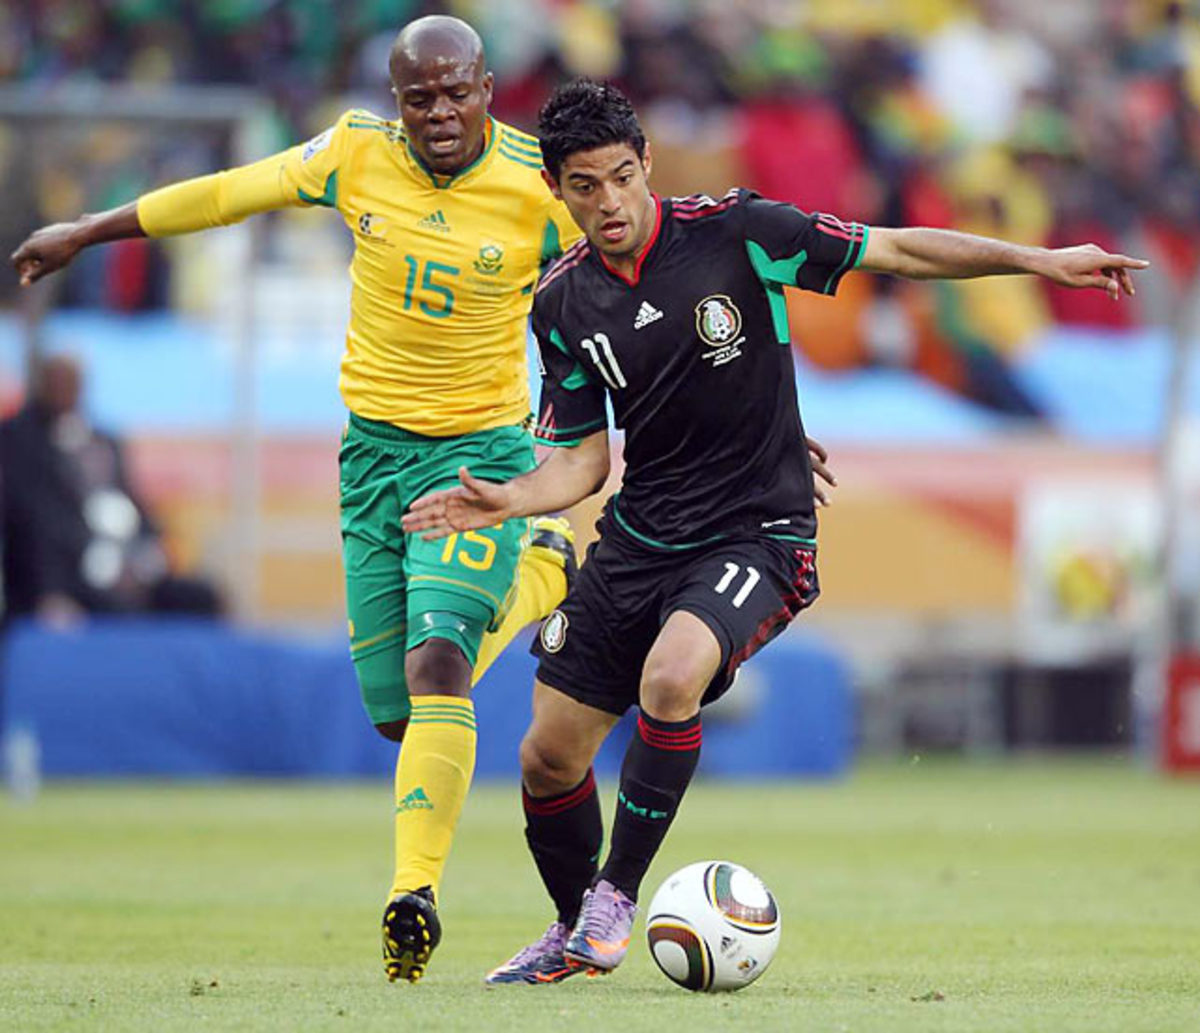 South Africa 1, Mexico 1